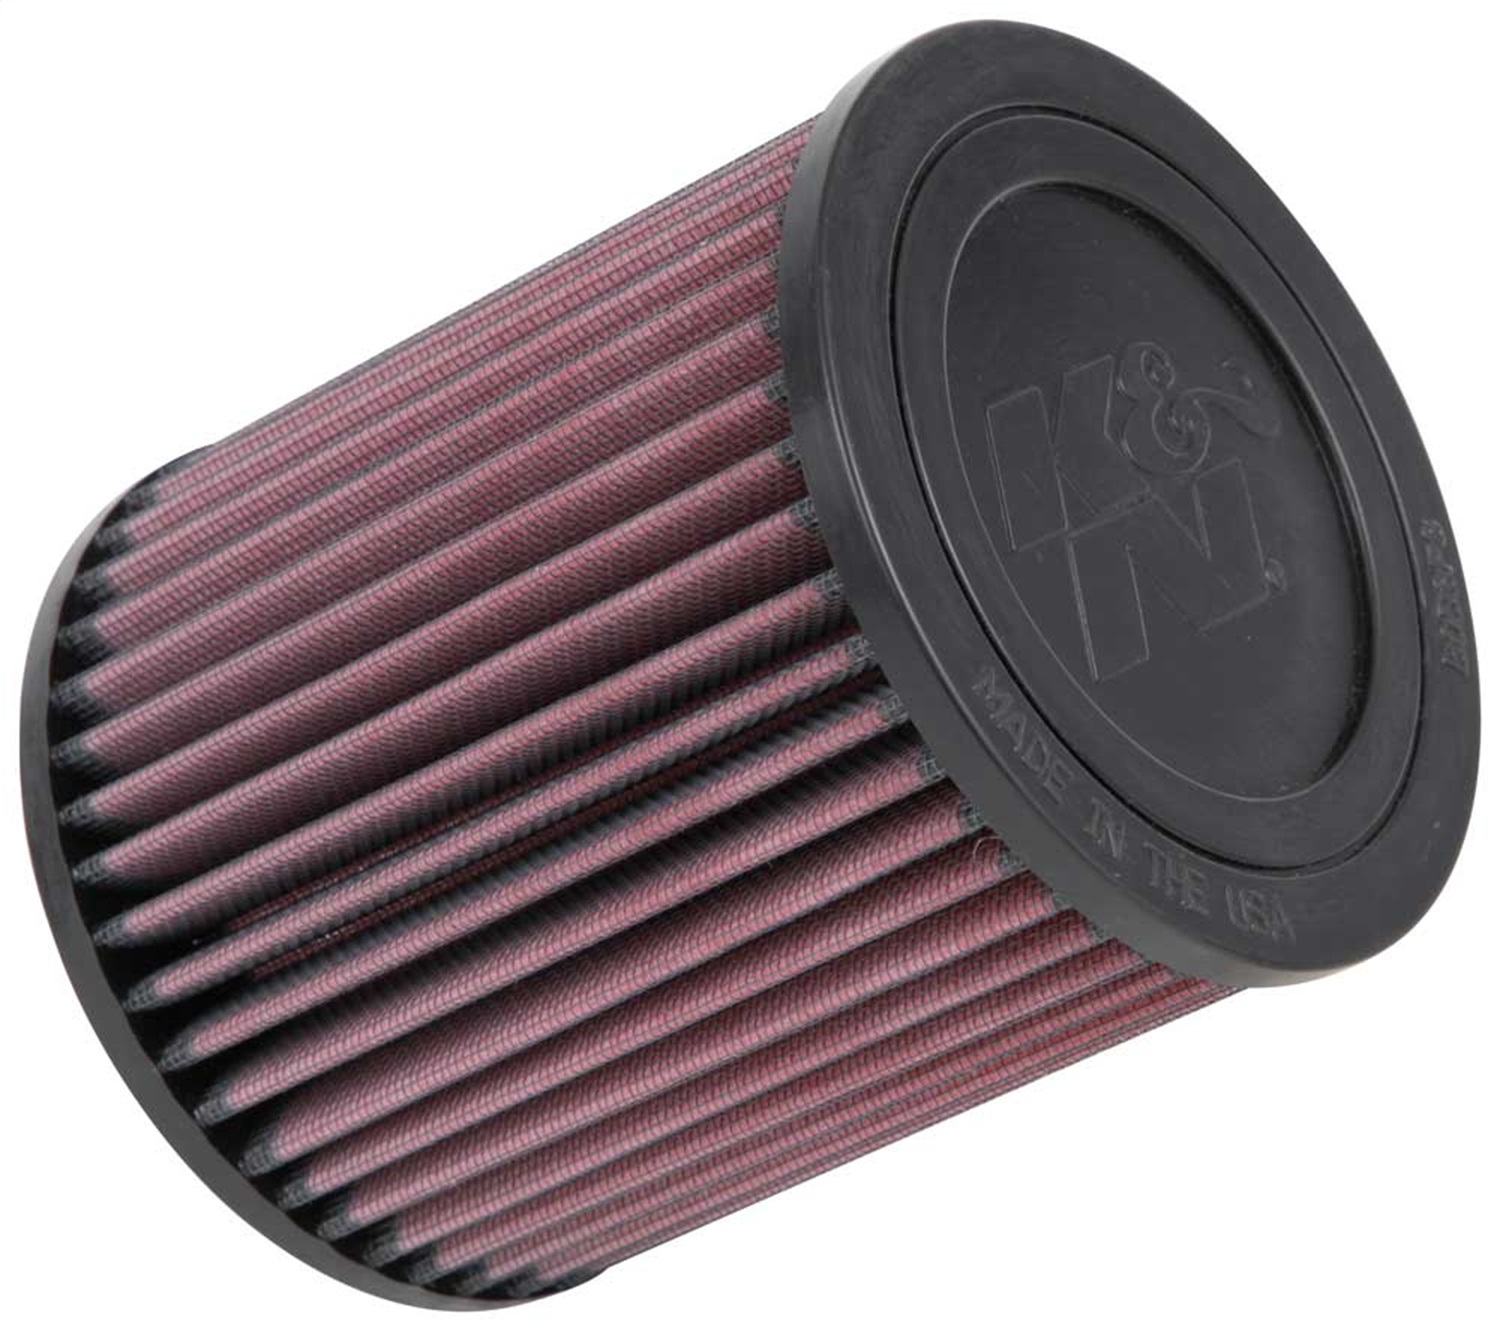 K&N Filters K&N Filters E-1998 Air Filter Fits 11-15 Caliber Compass Patriot